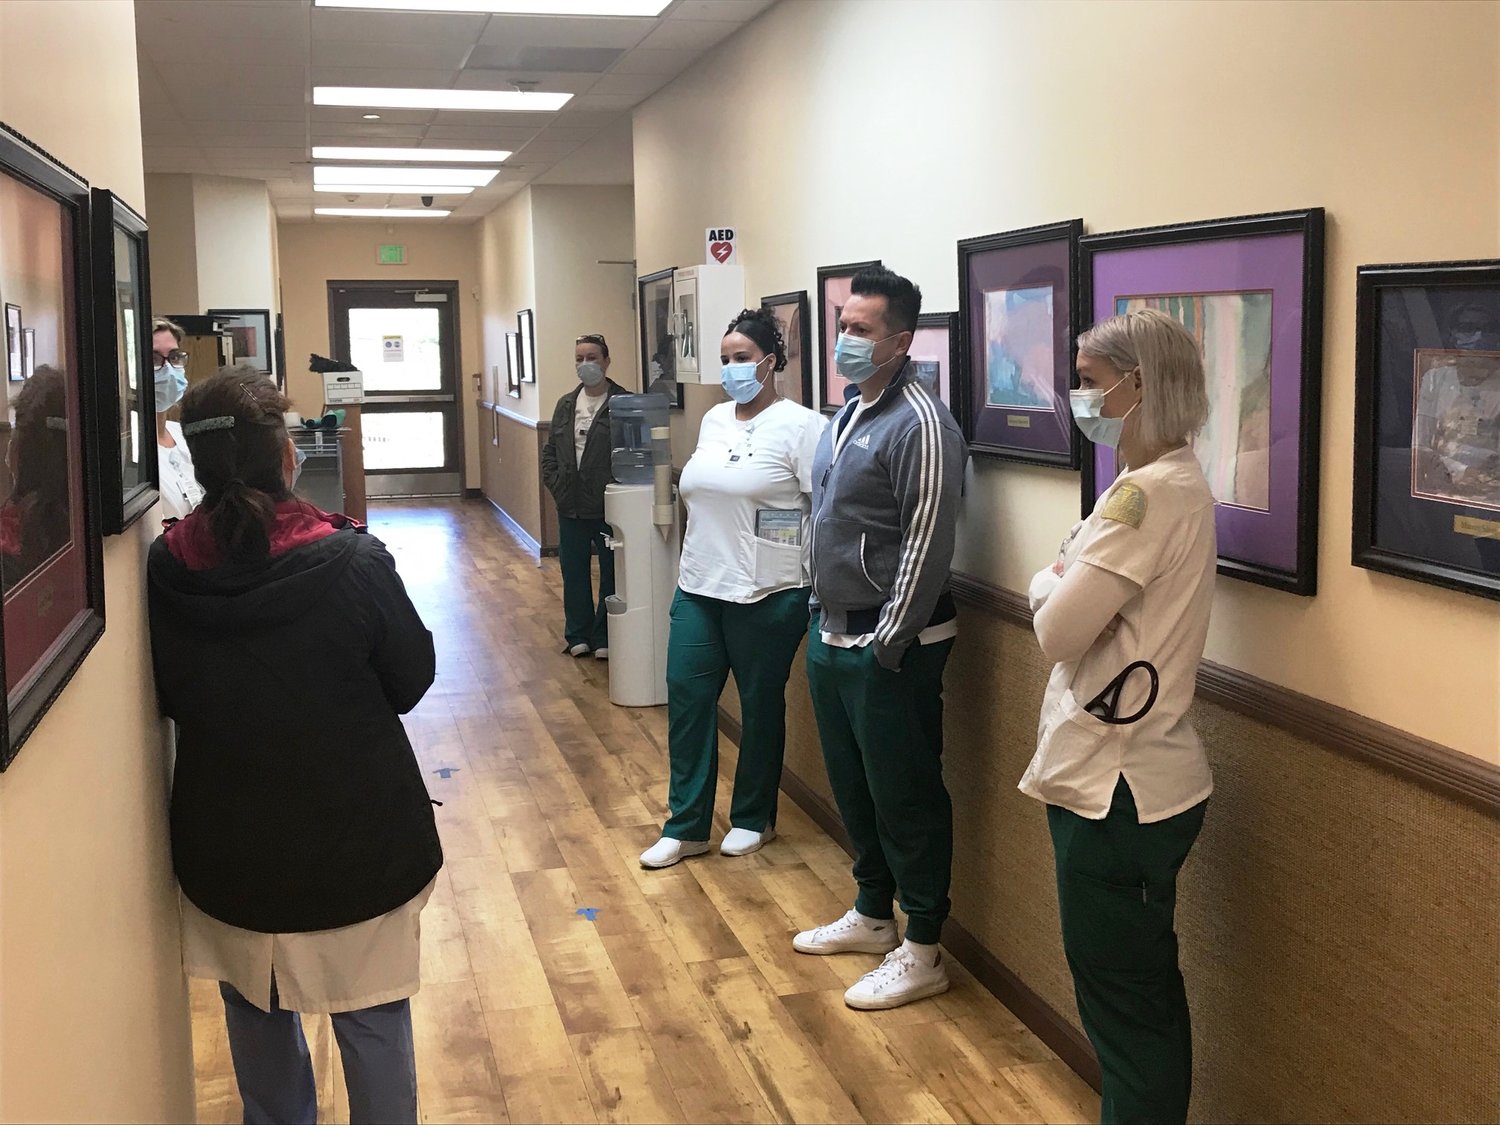 Nursing students meet with their clinical instructor at New Hope Community to receive their assignment and goals for the day.